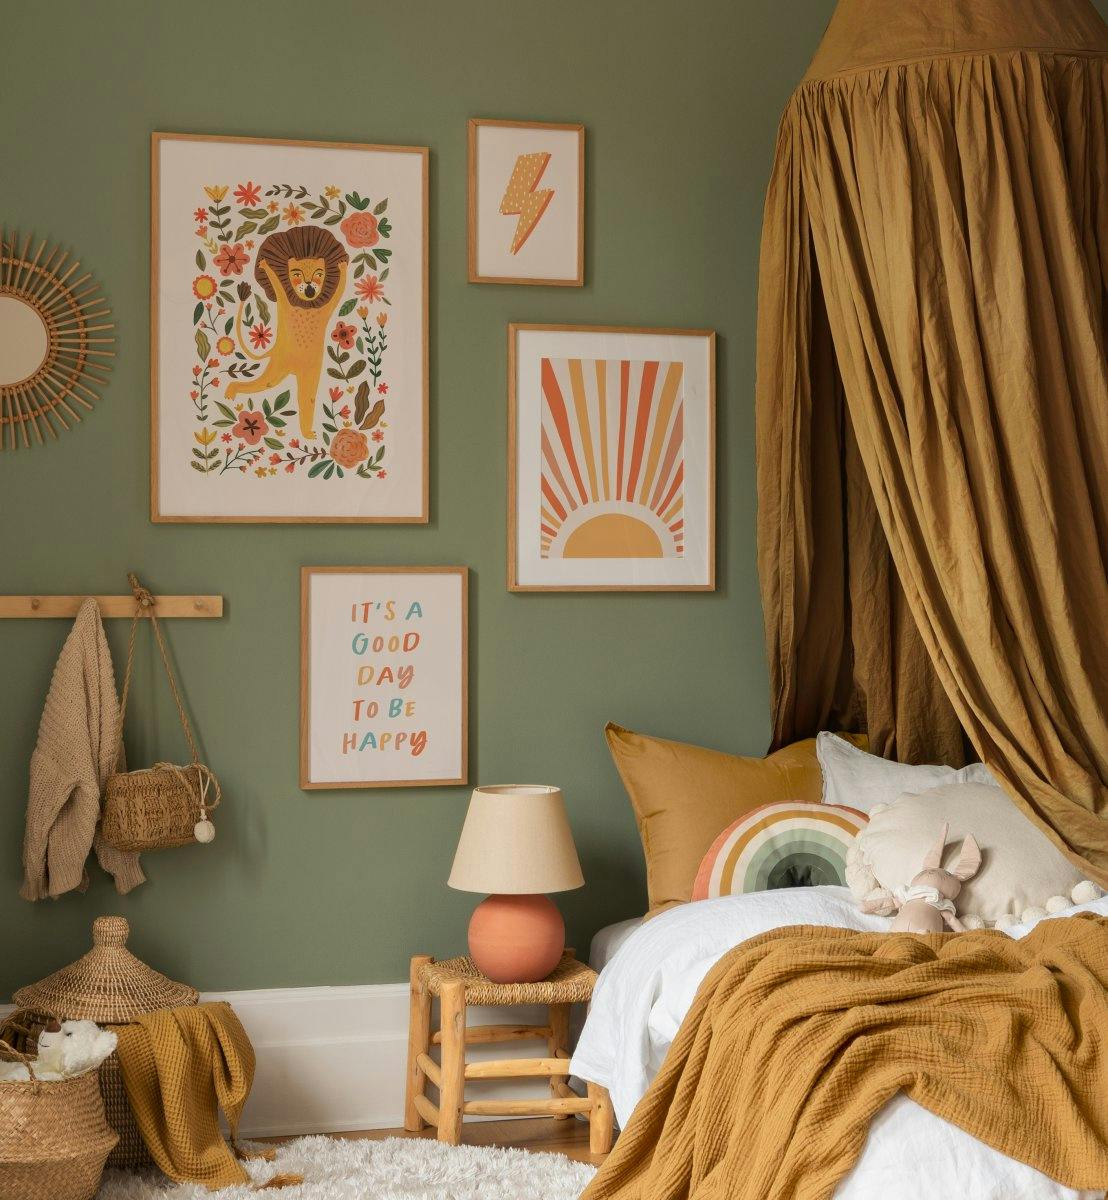 Animal print and illustrations in happy colors for children's bedroom